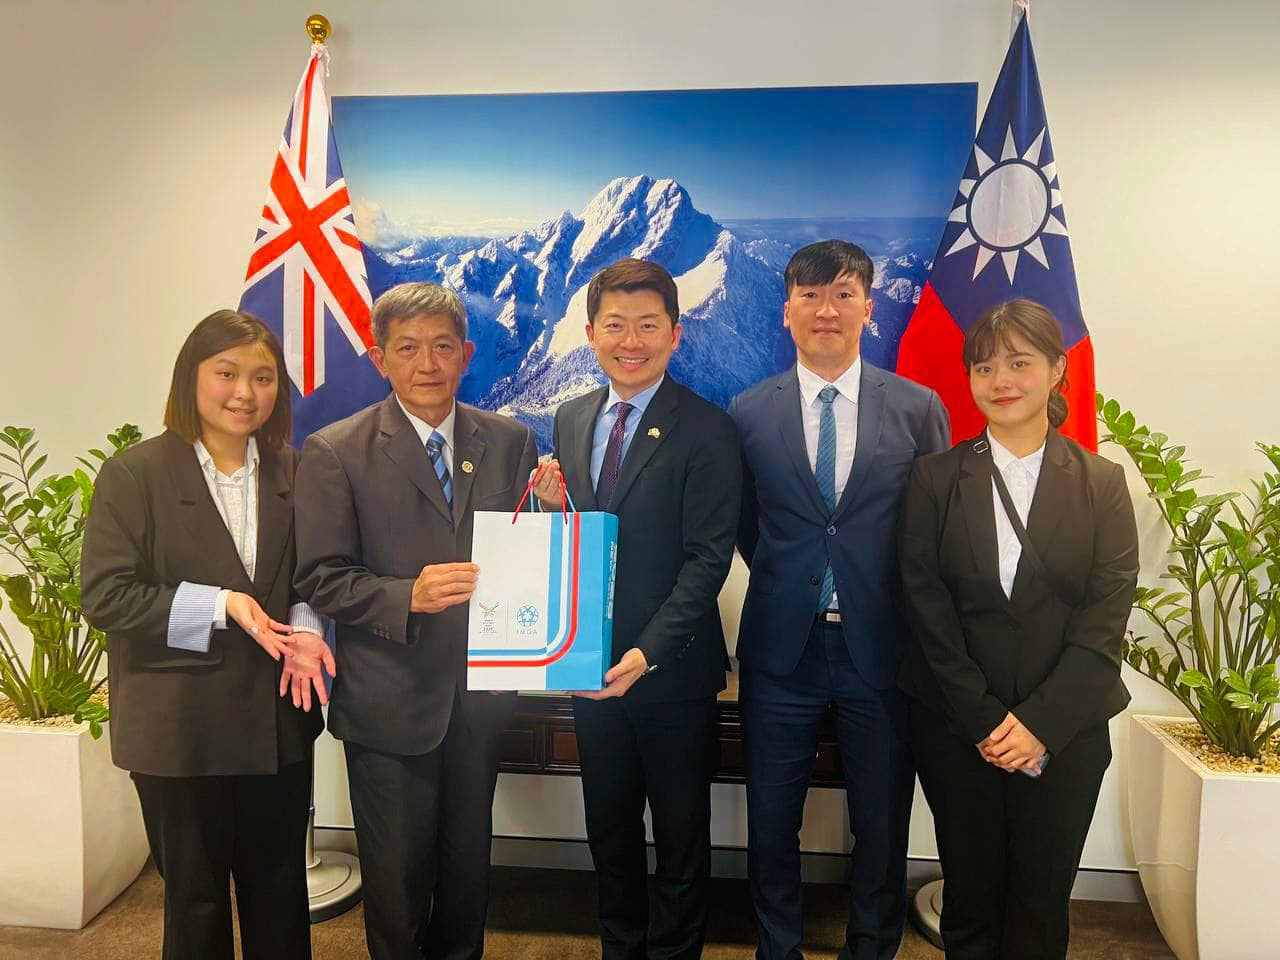 Director General David Cheng-Wei Wu was pleased to receive Mr. Pei-Lin Tsai, Deputy Commissioner of Department of Sports, Taipei City Government and his delegation.

The World Masters Games takes place every four years. Sydney, Melbourne and Brisbane were host cities respectively. Taiwan’s Taipei &amp; New Taipei City will co-host World Masters Games 2025 during 17-30 May, and Perth will be the host in 2029

Come to join the Games and explore Taiwan’s ?? unique charm : https://wmg2025.tw 